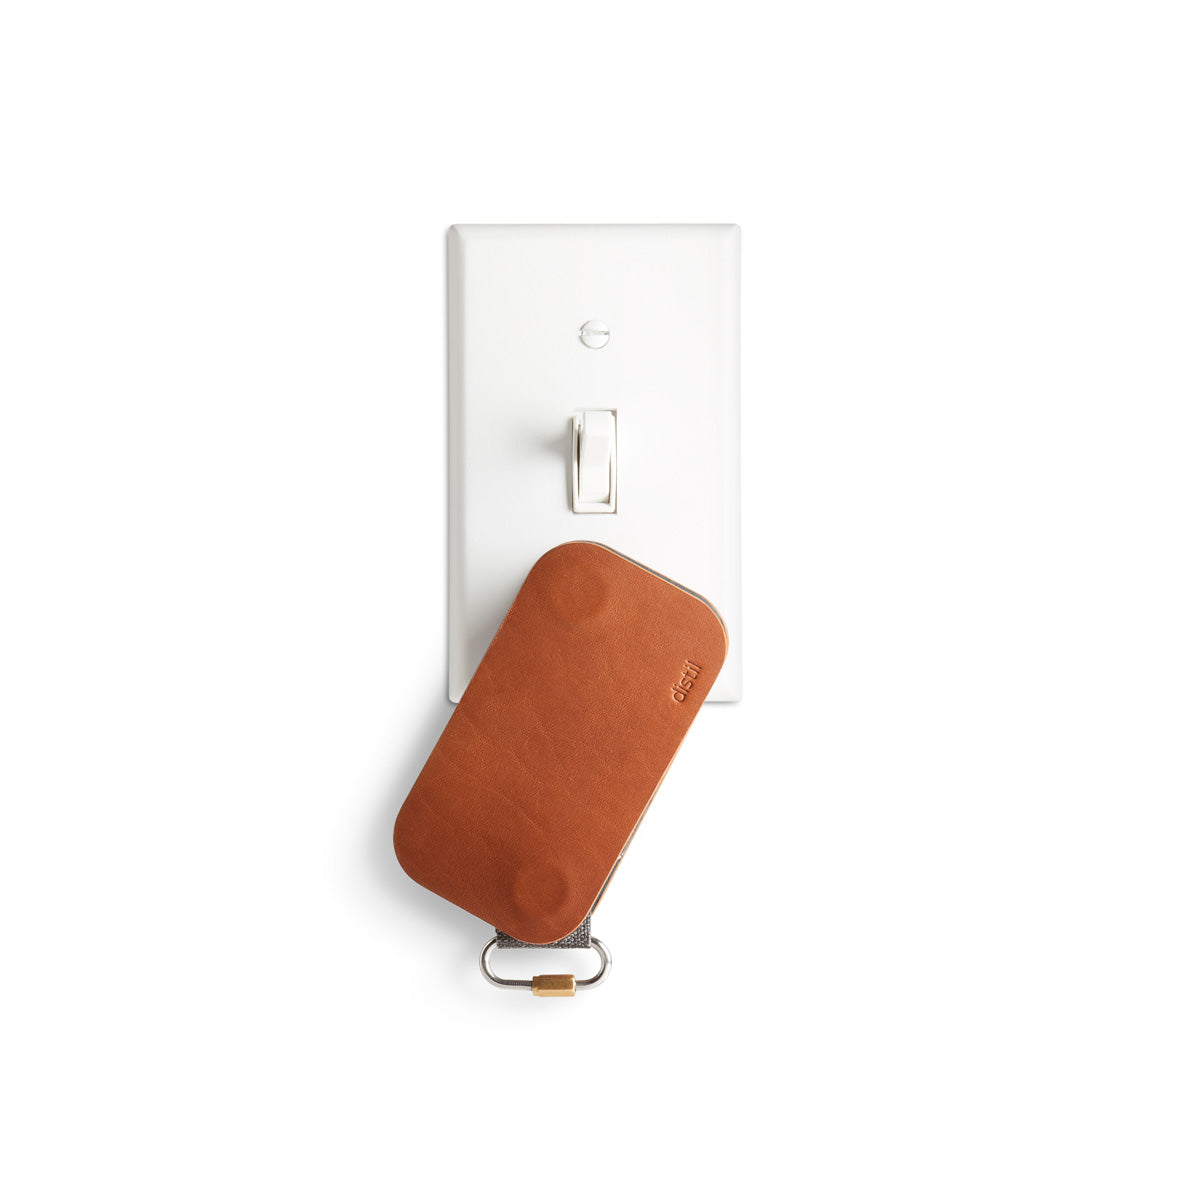 distil brown leather keyfolio hanging from white light switch plate with magnets